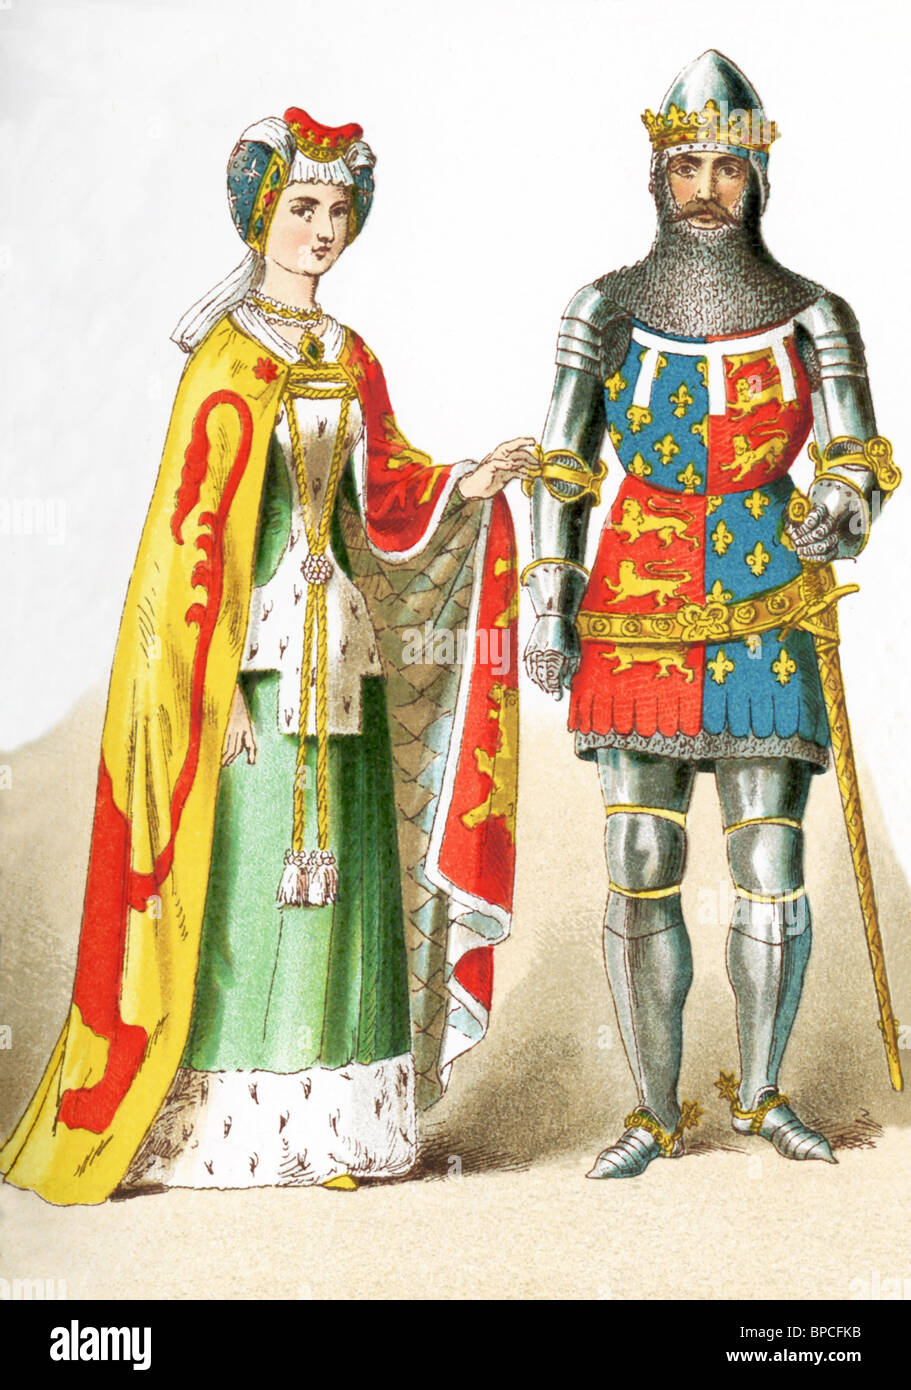 This illustration shows two English people who lived between A.D. 1300 and 1400: a lady of rank and Edward the Black Prince. Stock Photo